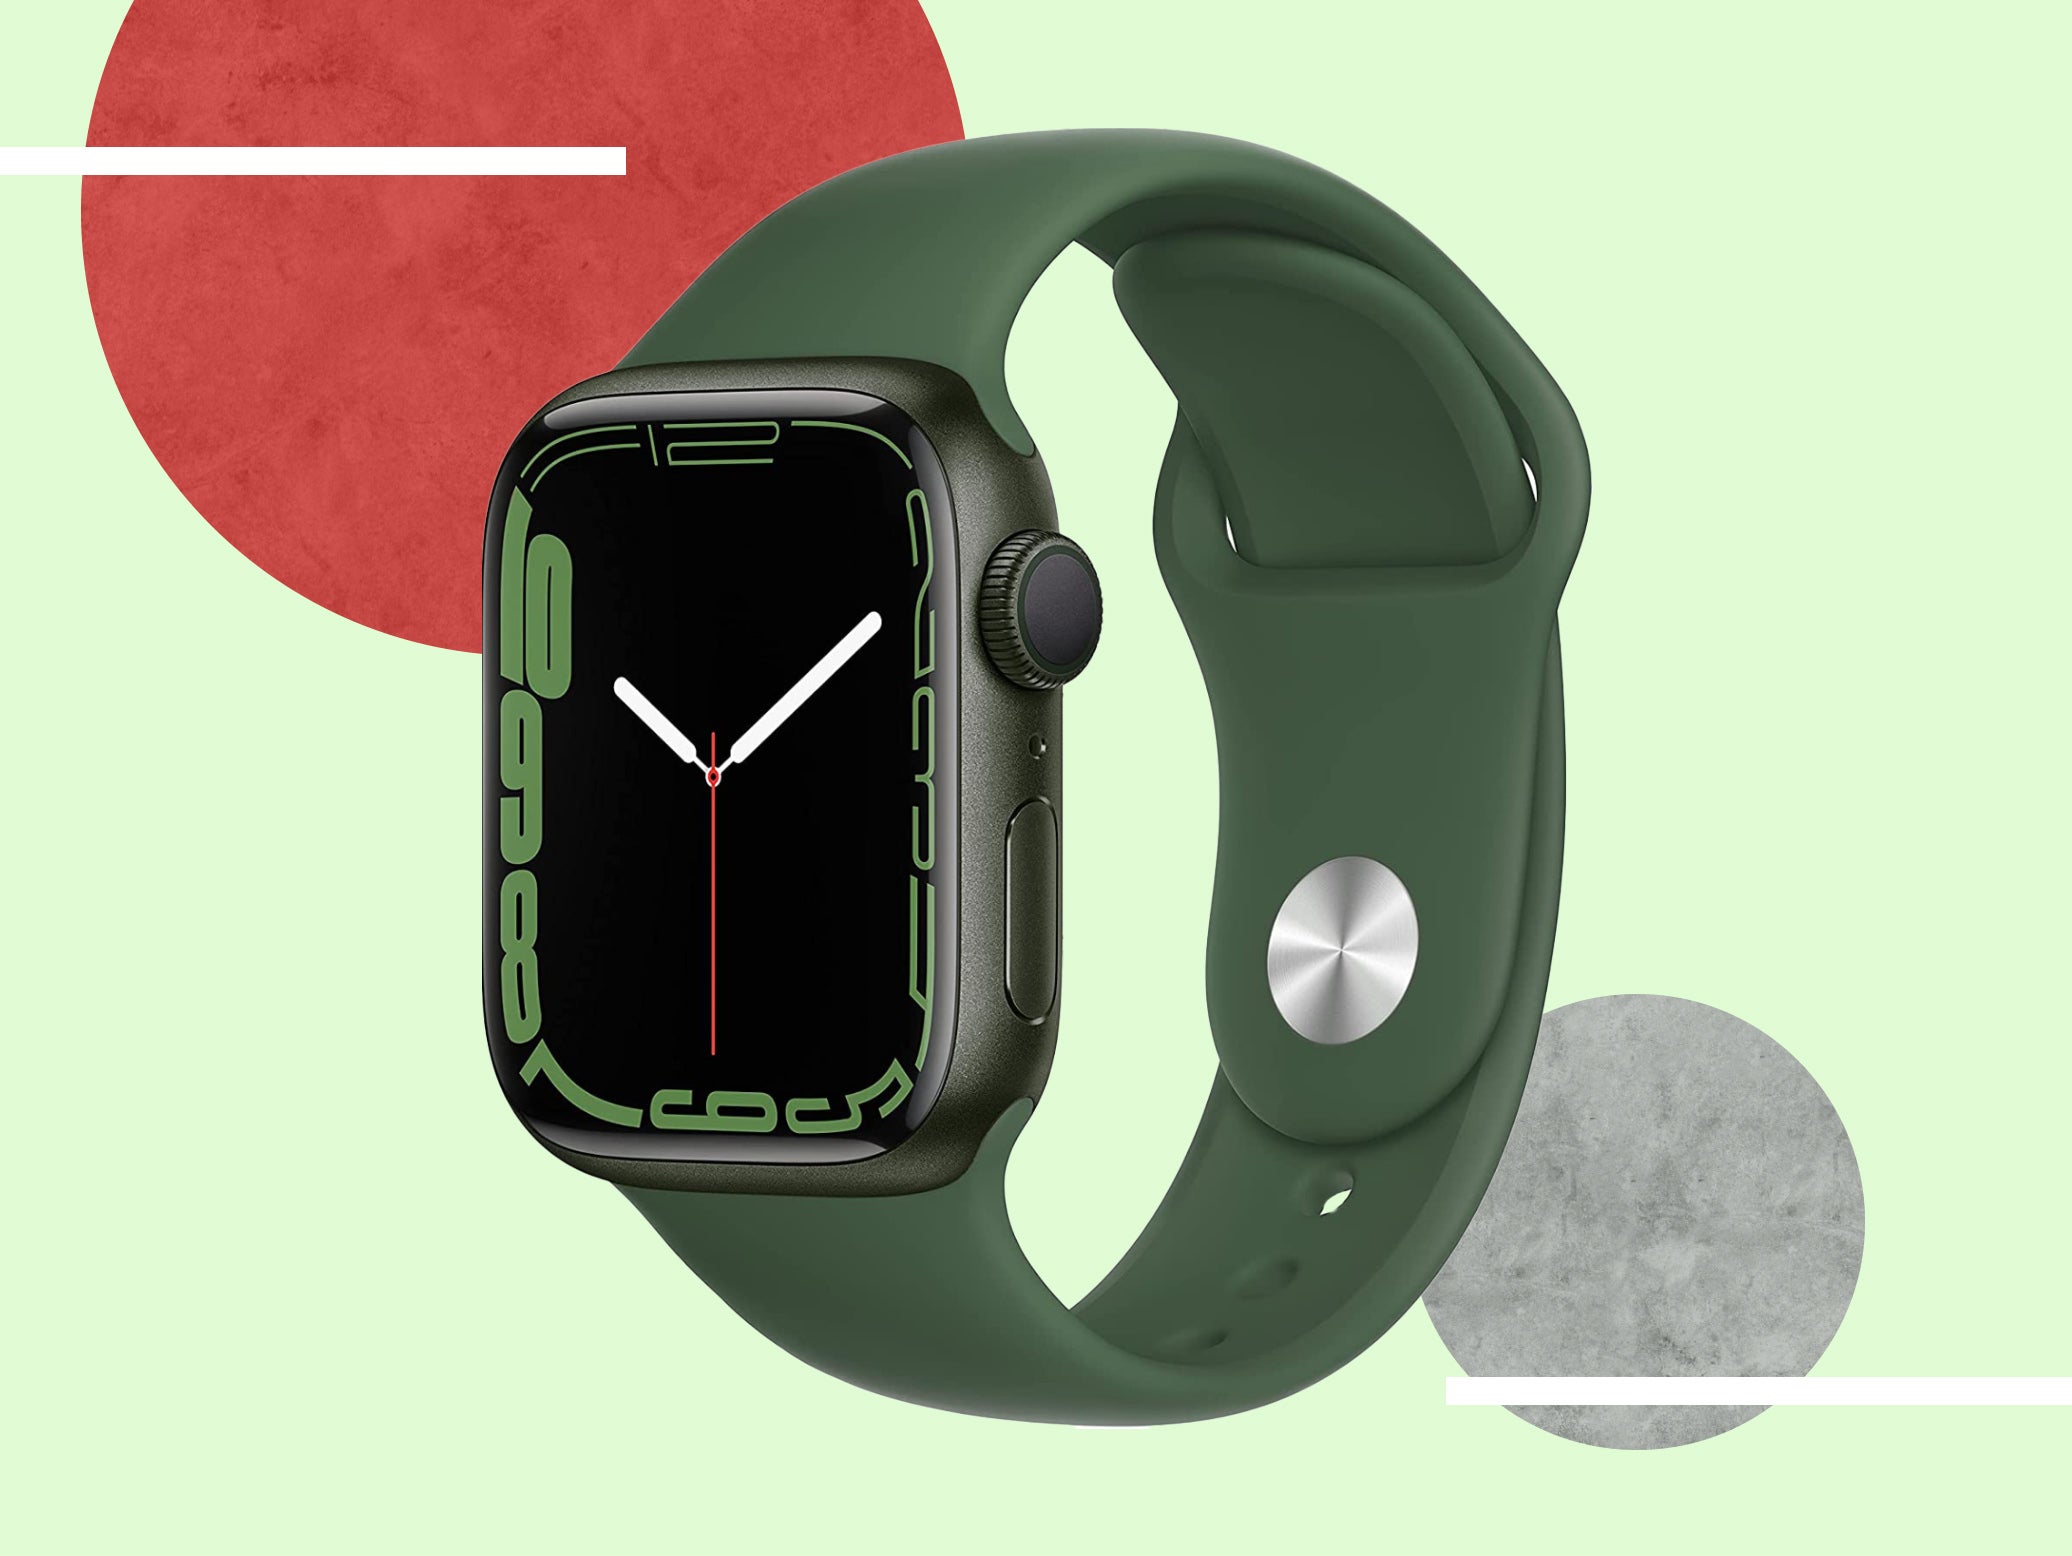 Deals are available for several models of Apple’s wearable